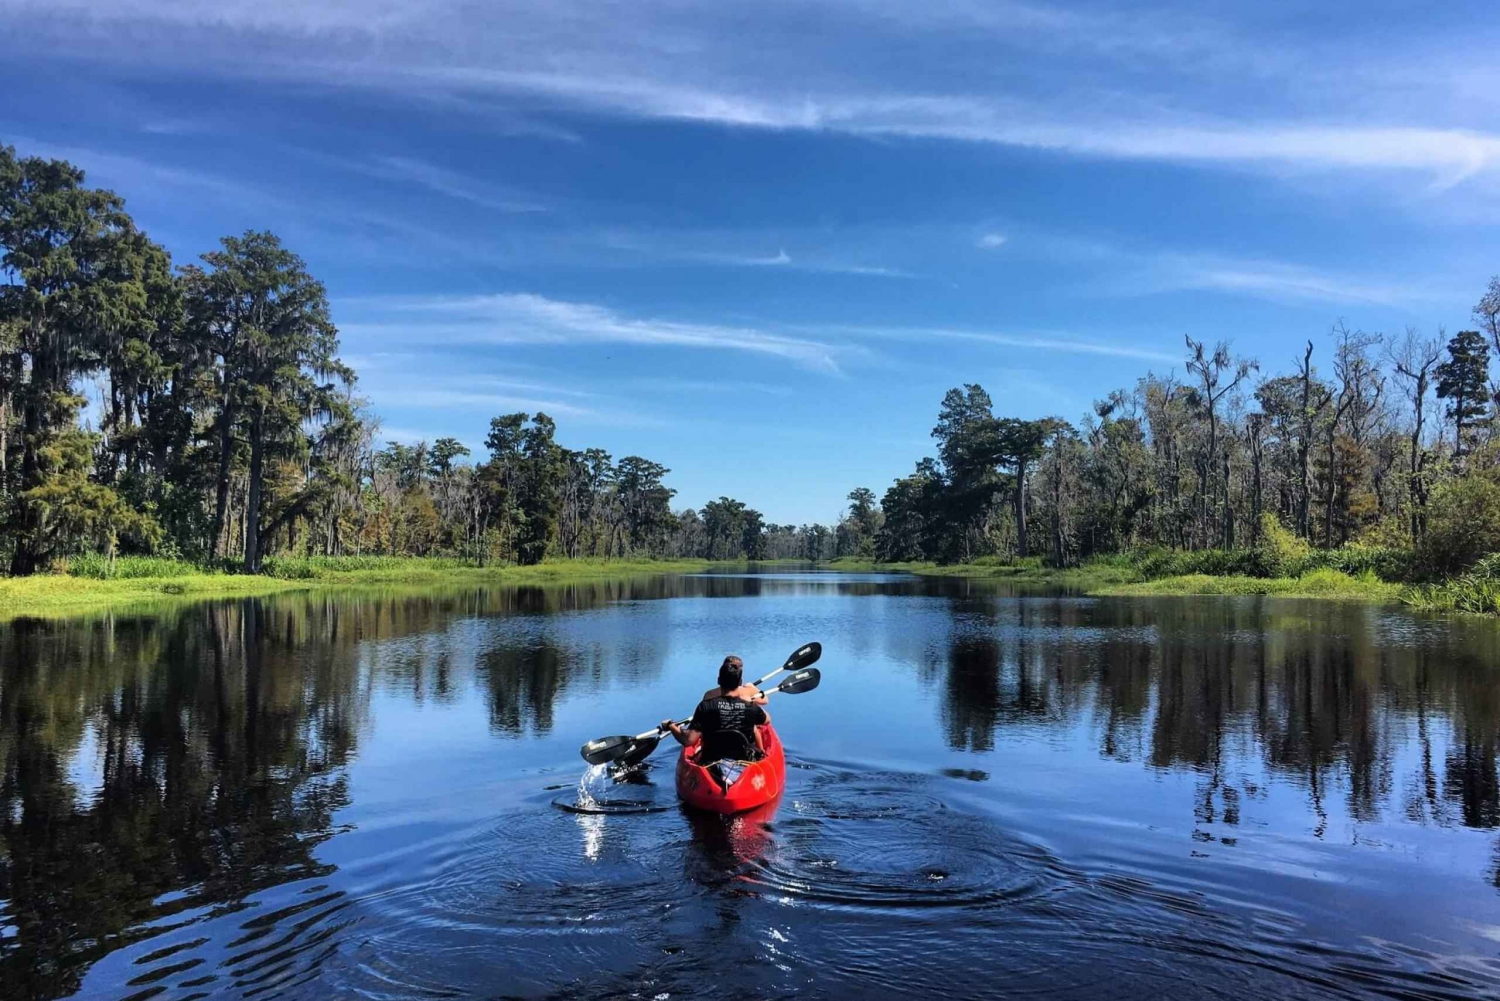 New Orleans: Extended Manchac Swamp Kayak Tour